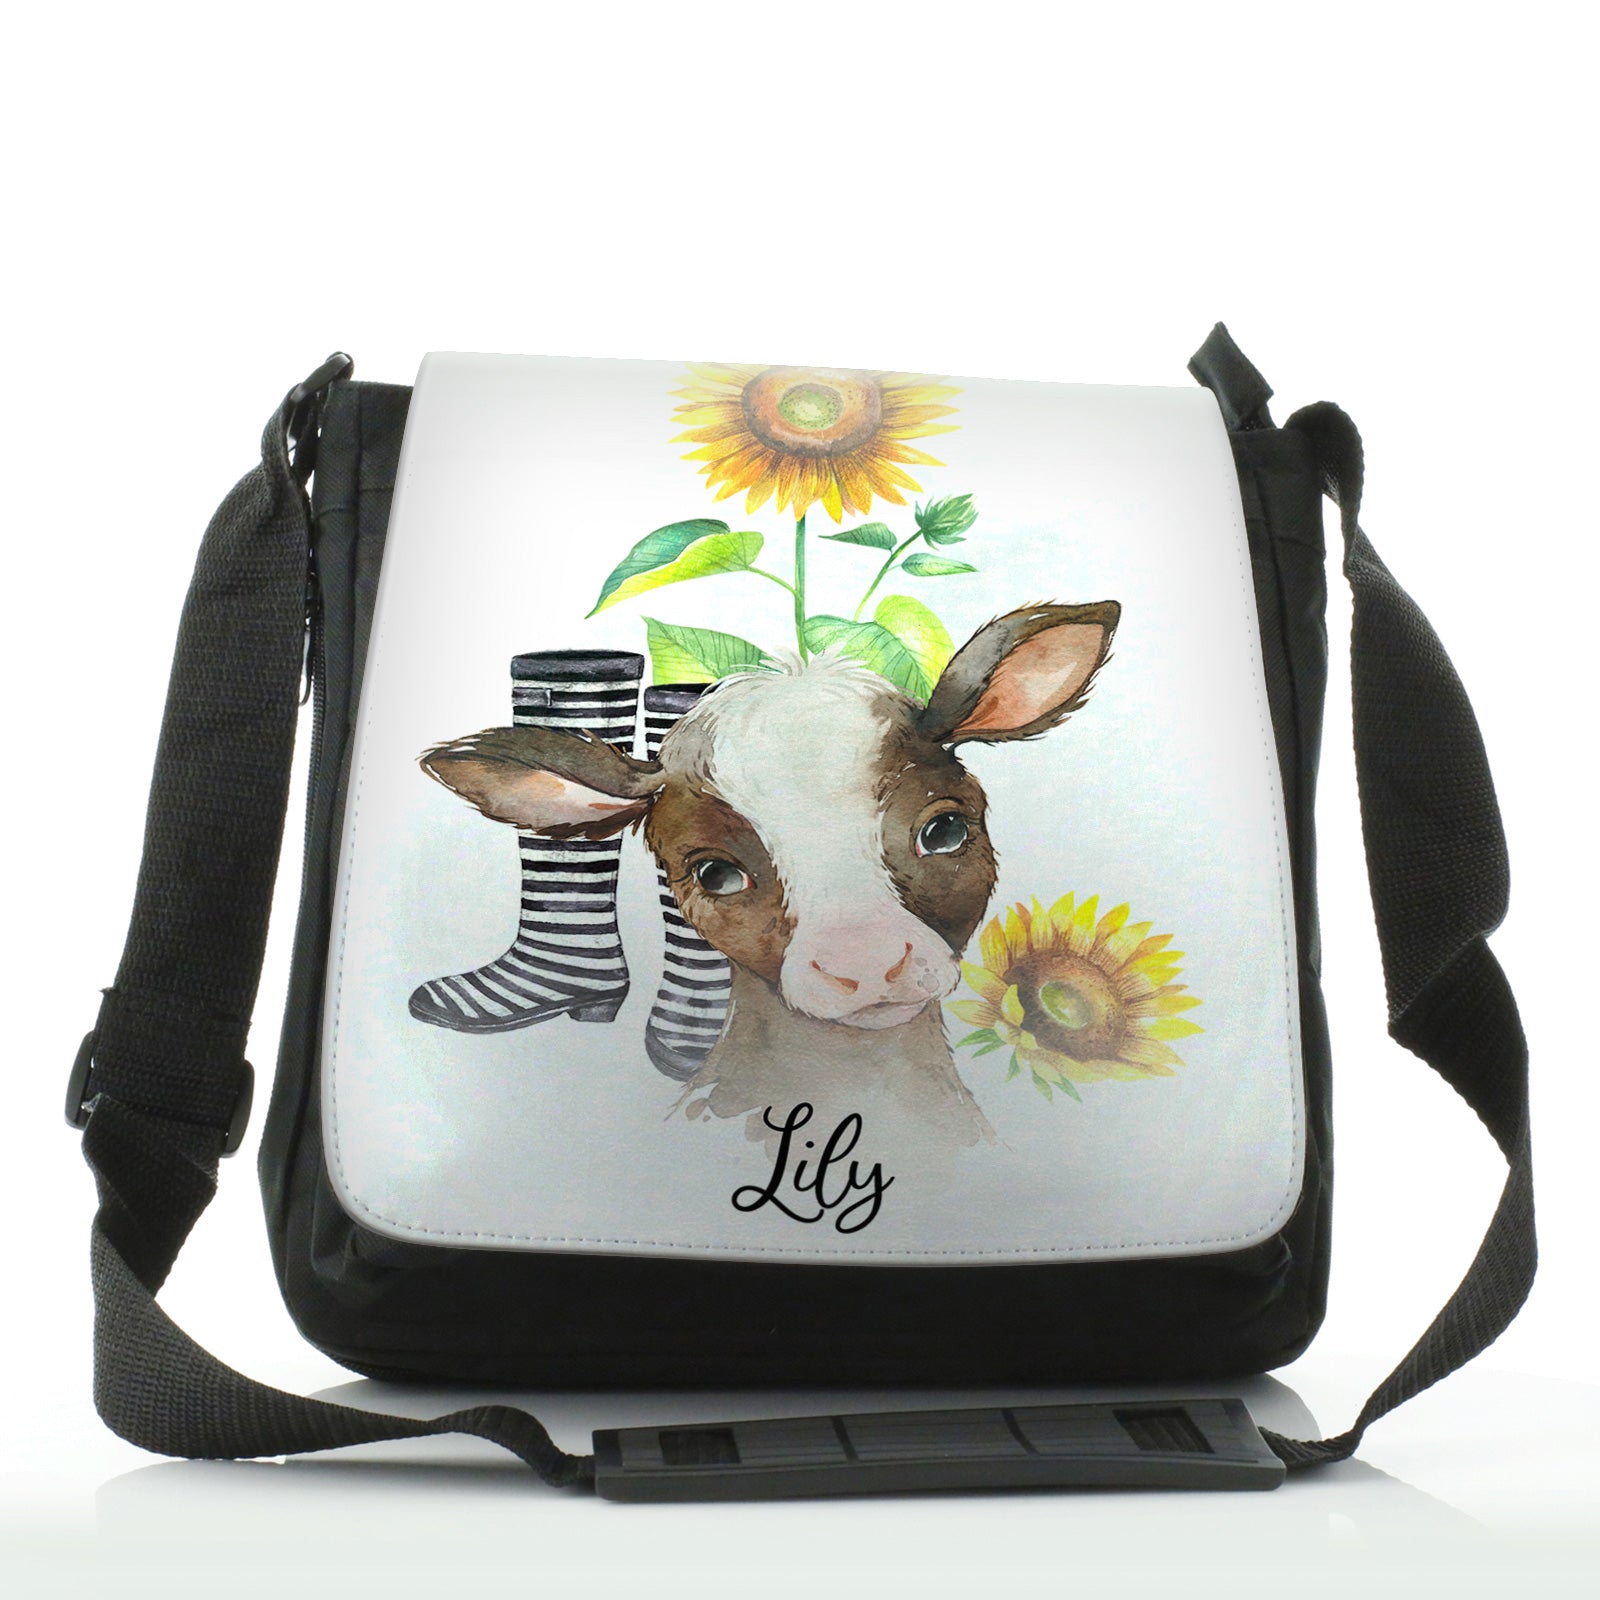 Personalised Shoulder Bag with Brown Cow Yellow Sunflowers and Cute Text